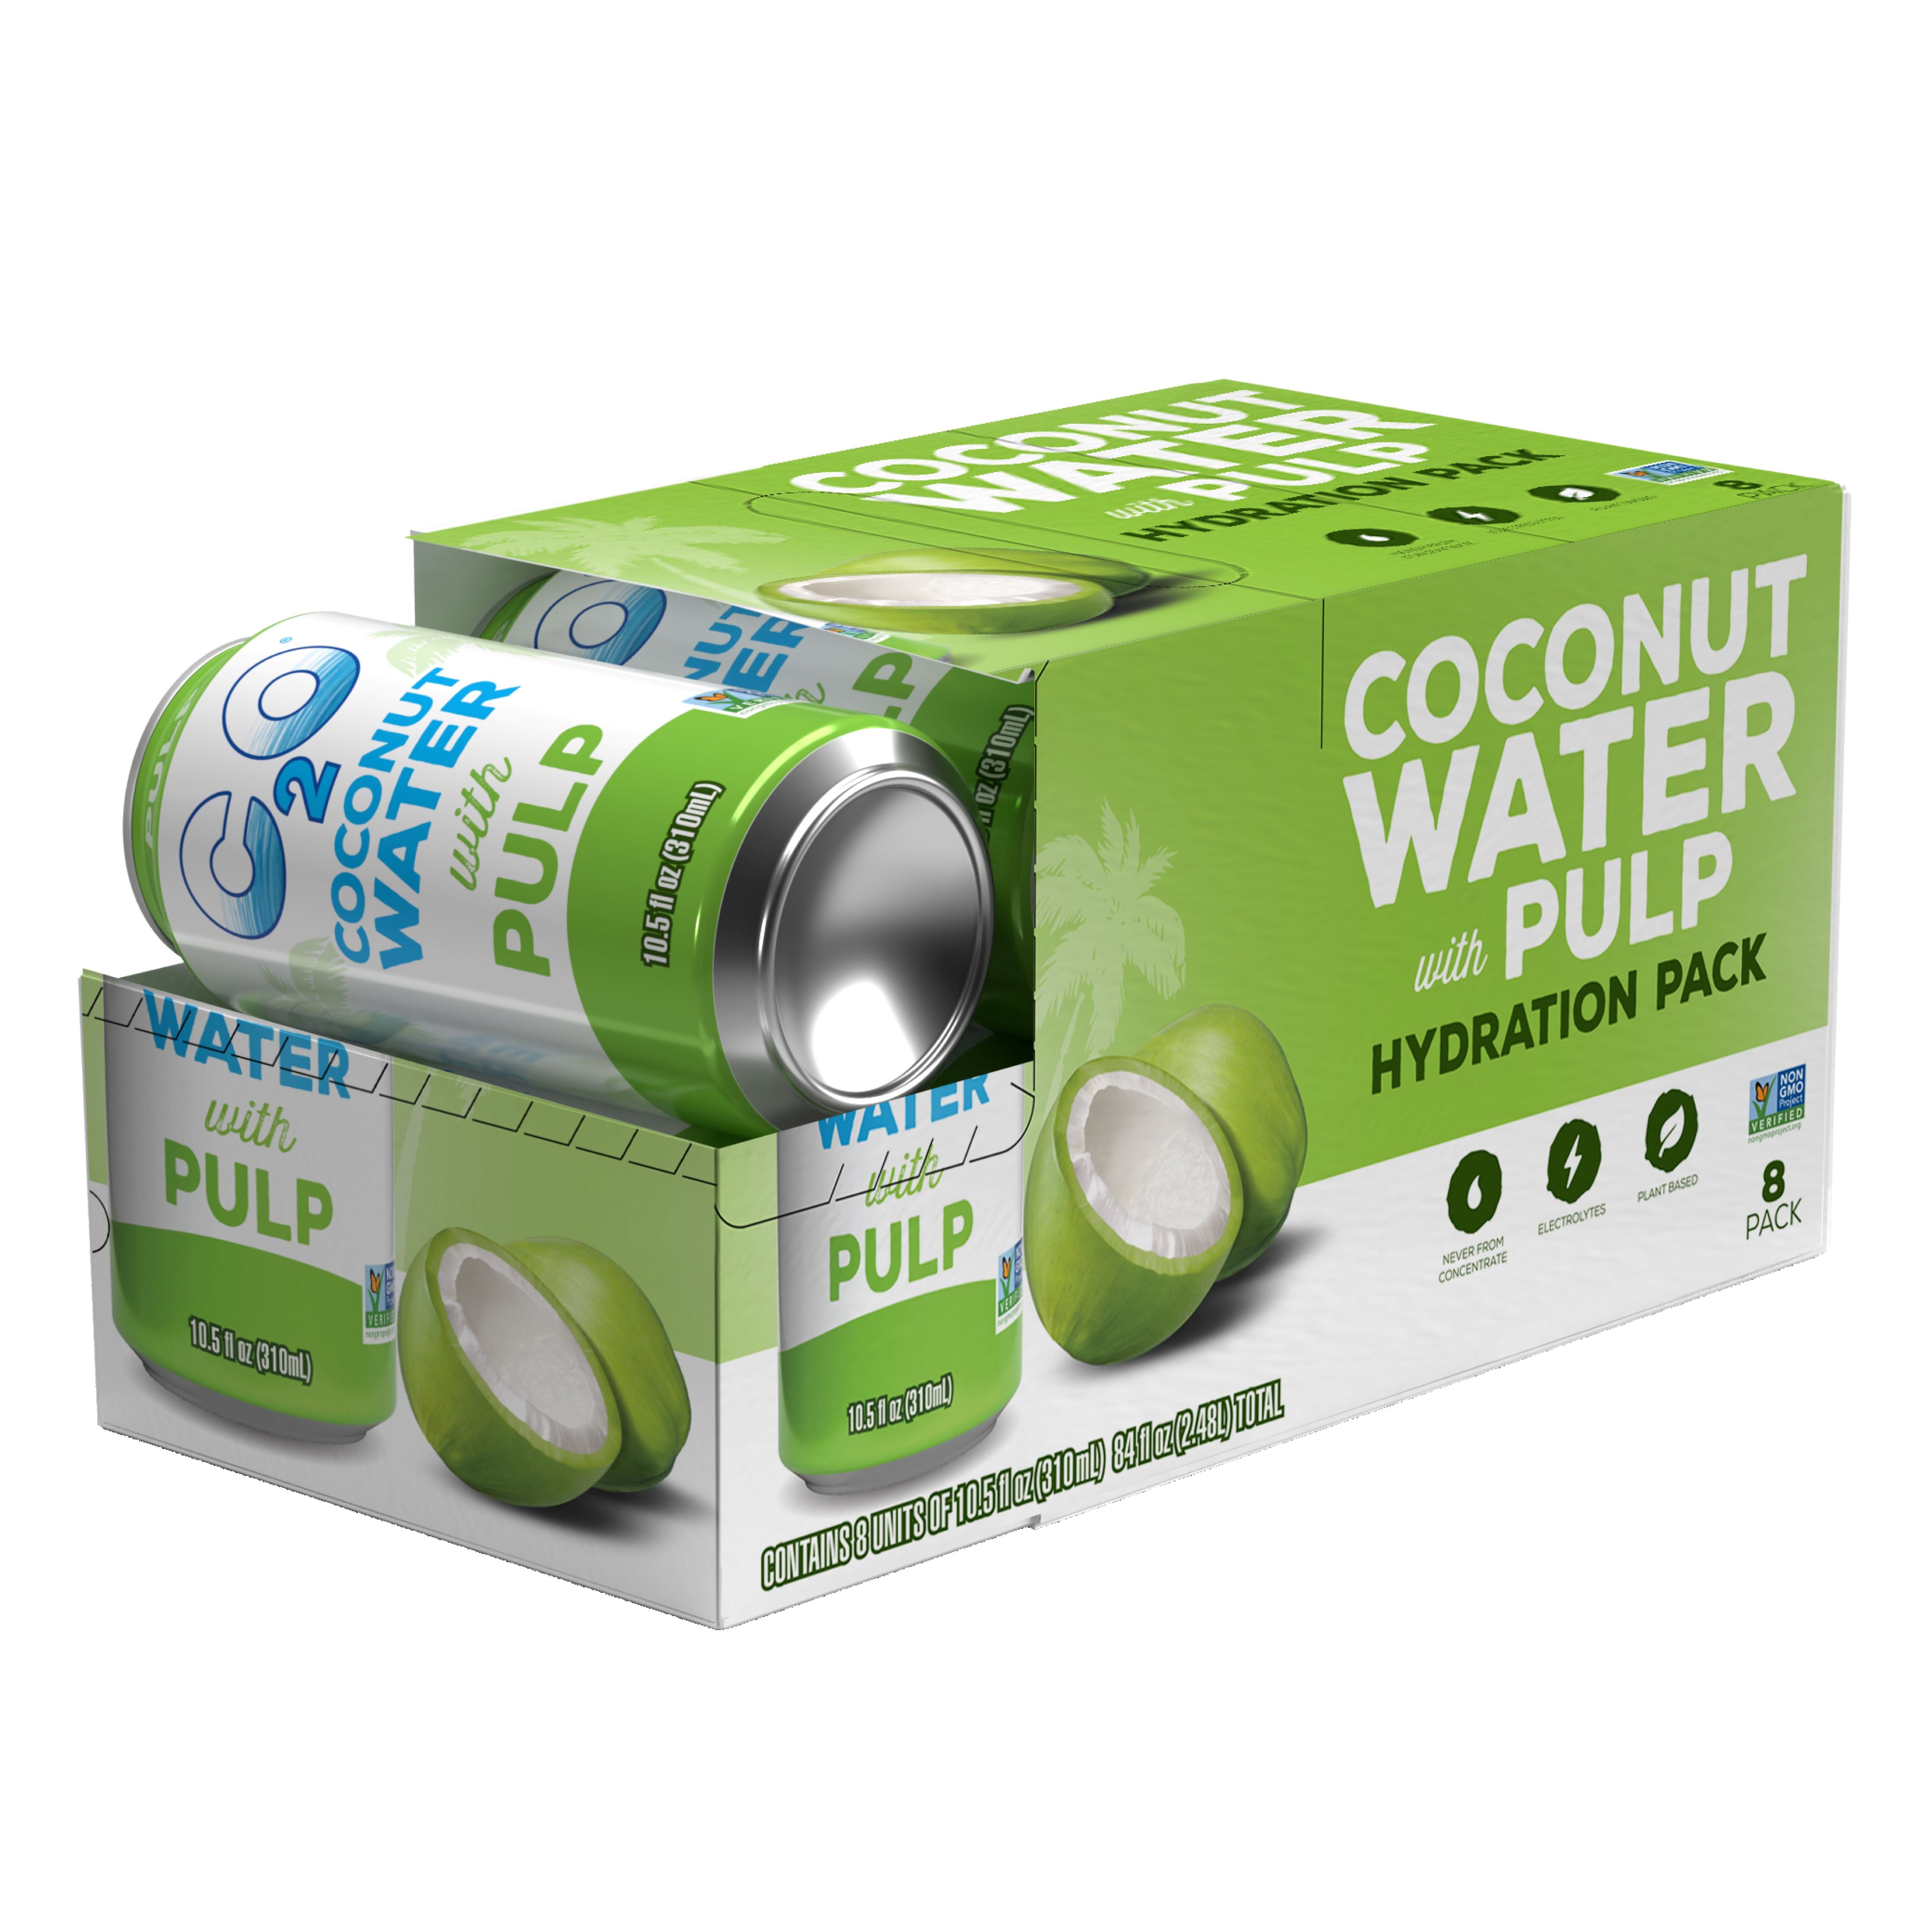 Coconut Water with Pulp - 10.5 fl oz (3 Packs of 8)